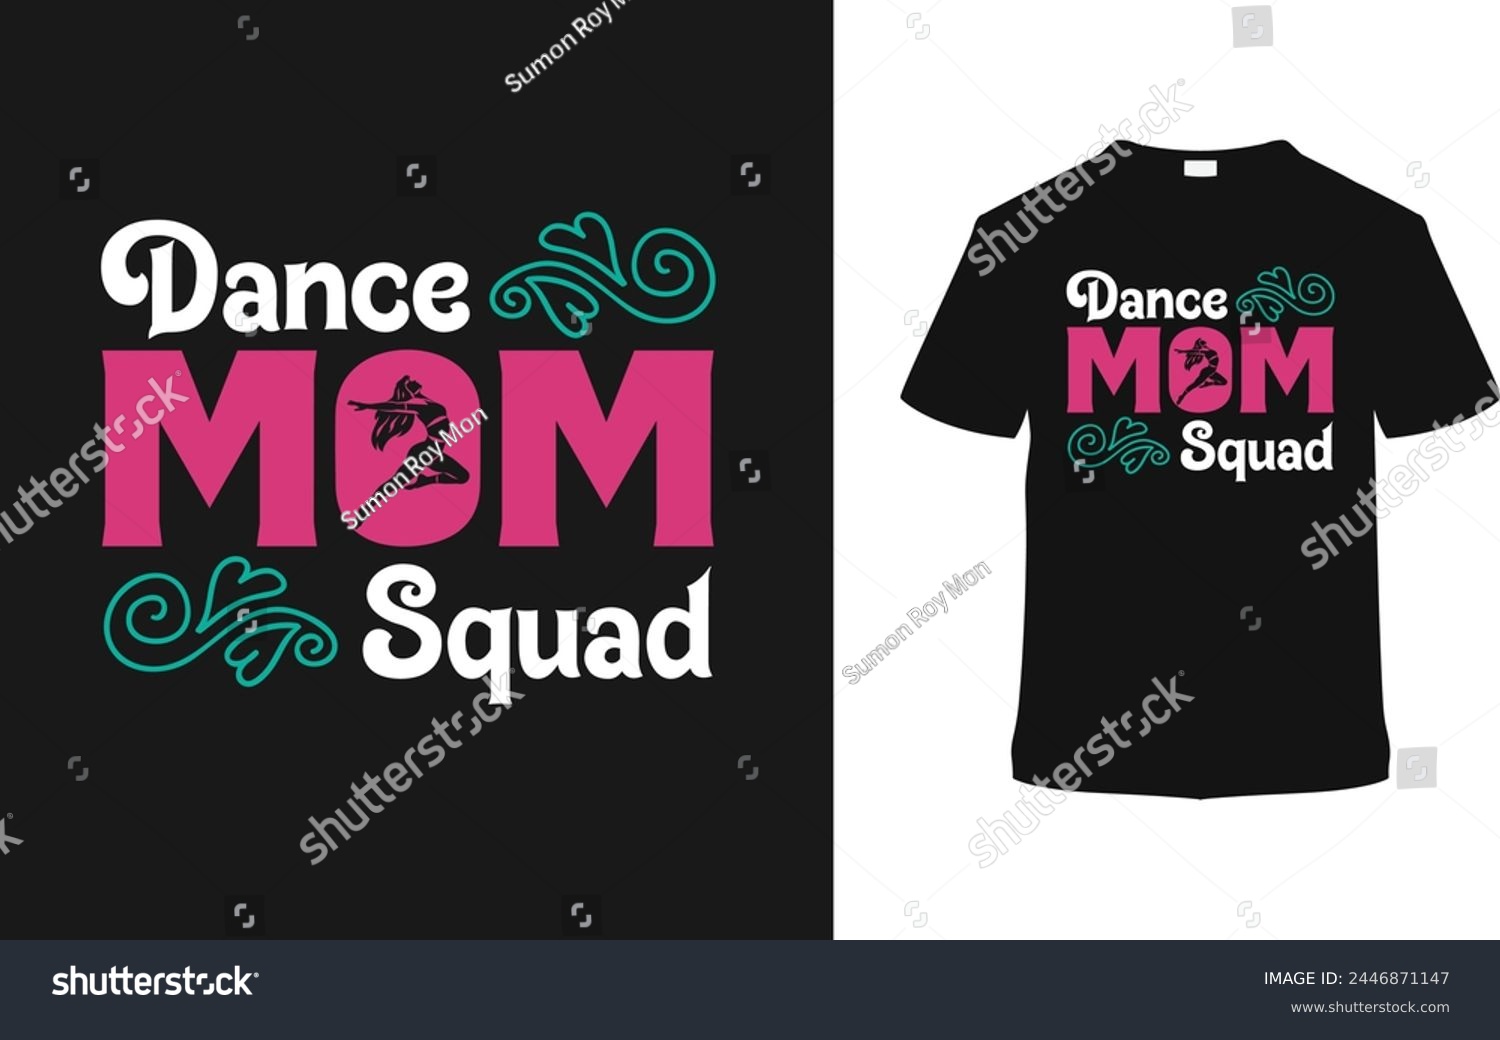 SVG of Dance Mom Squad Mother's Day T shirt Design, vector illustration, graphic template, print on demand, typography, vintage, eps 10, textile fabrics, retro style, element, apparel, mom tee svg